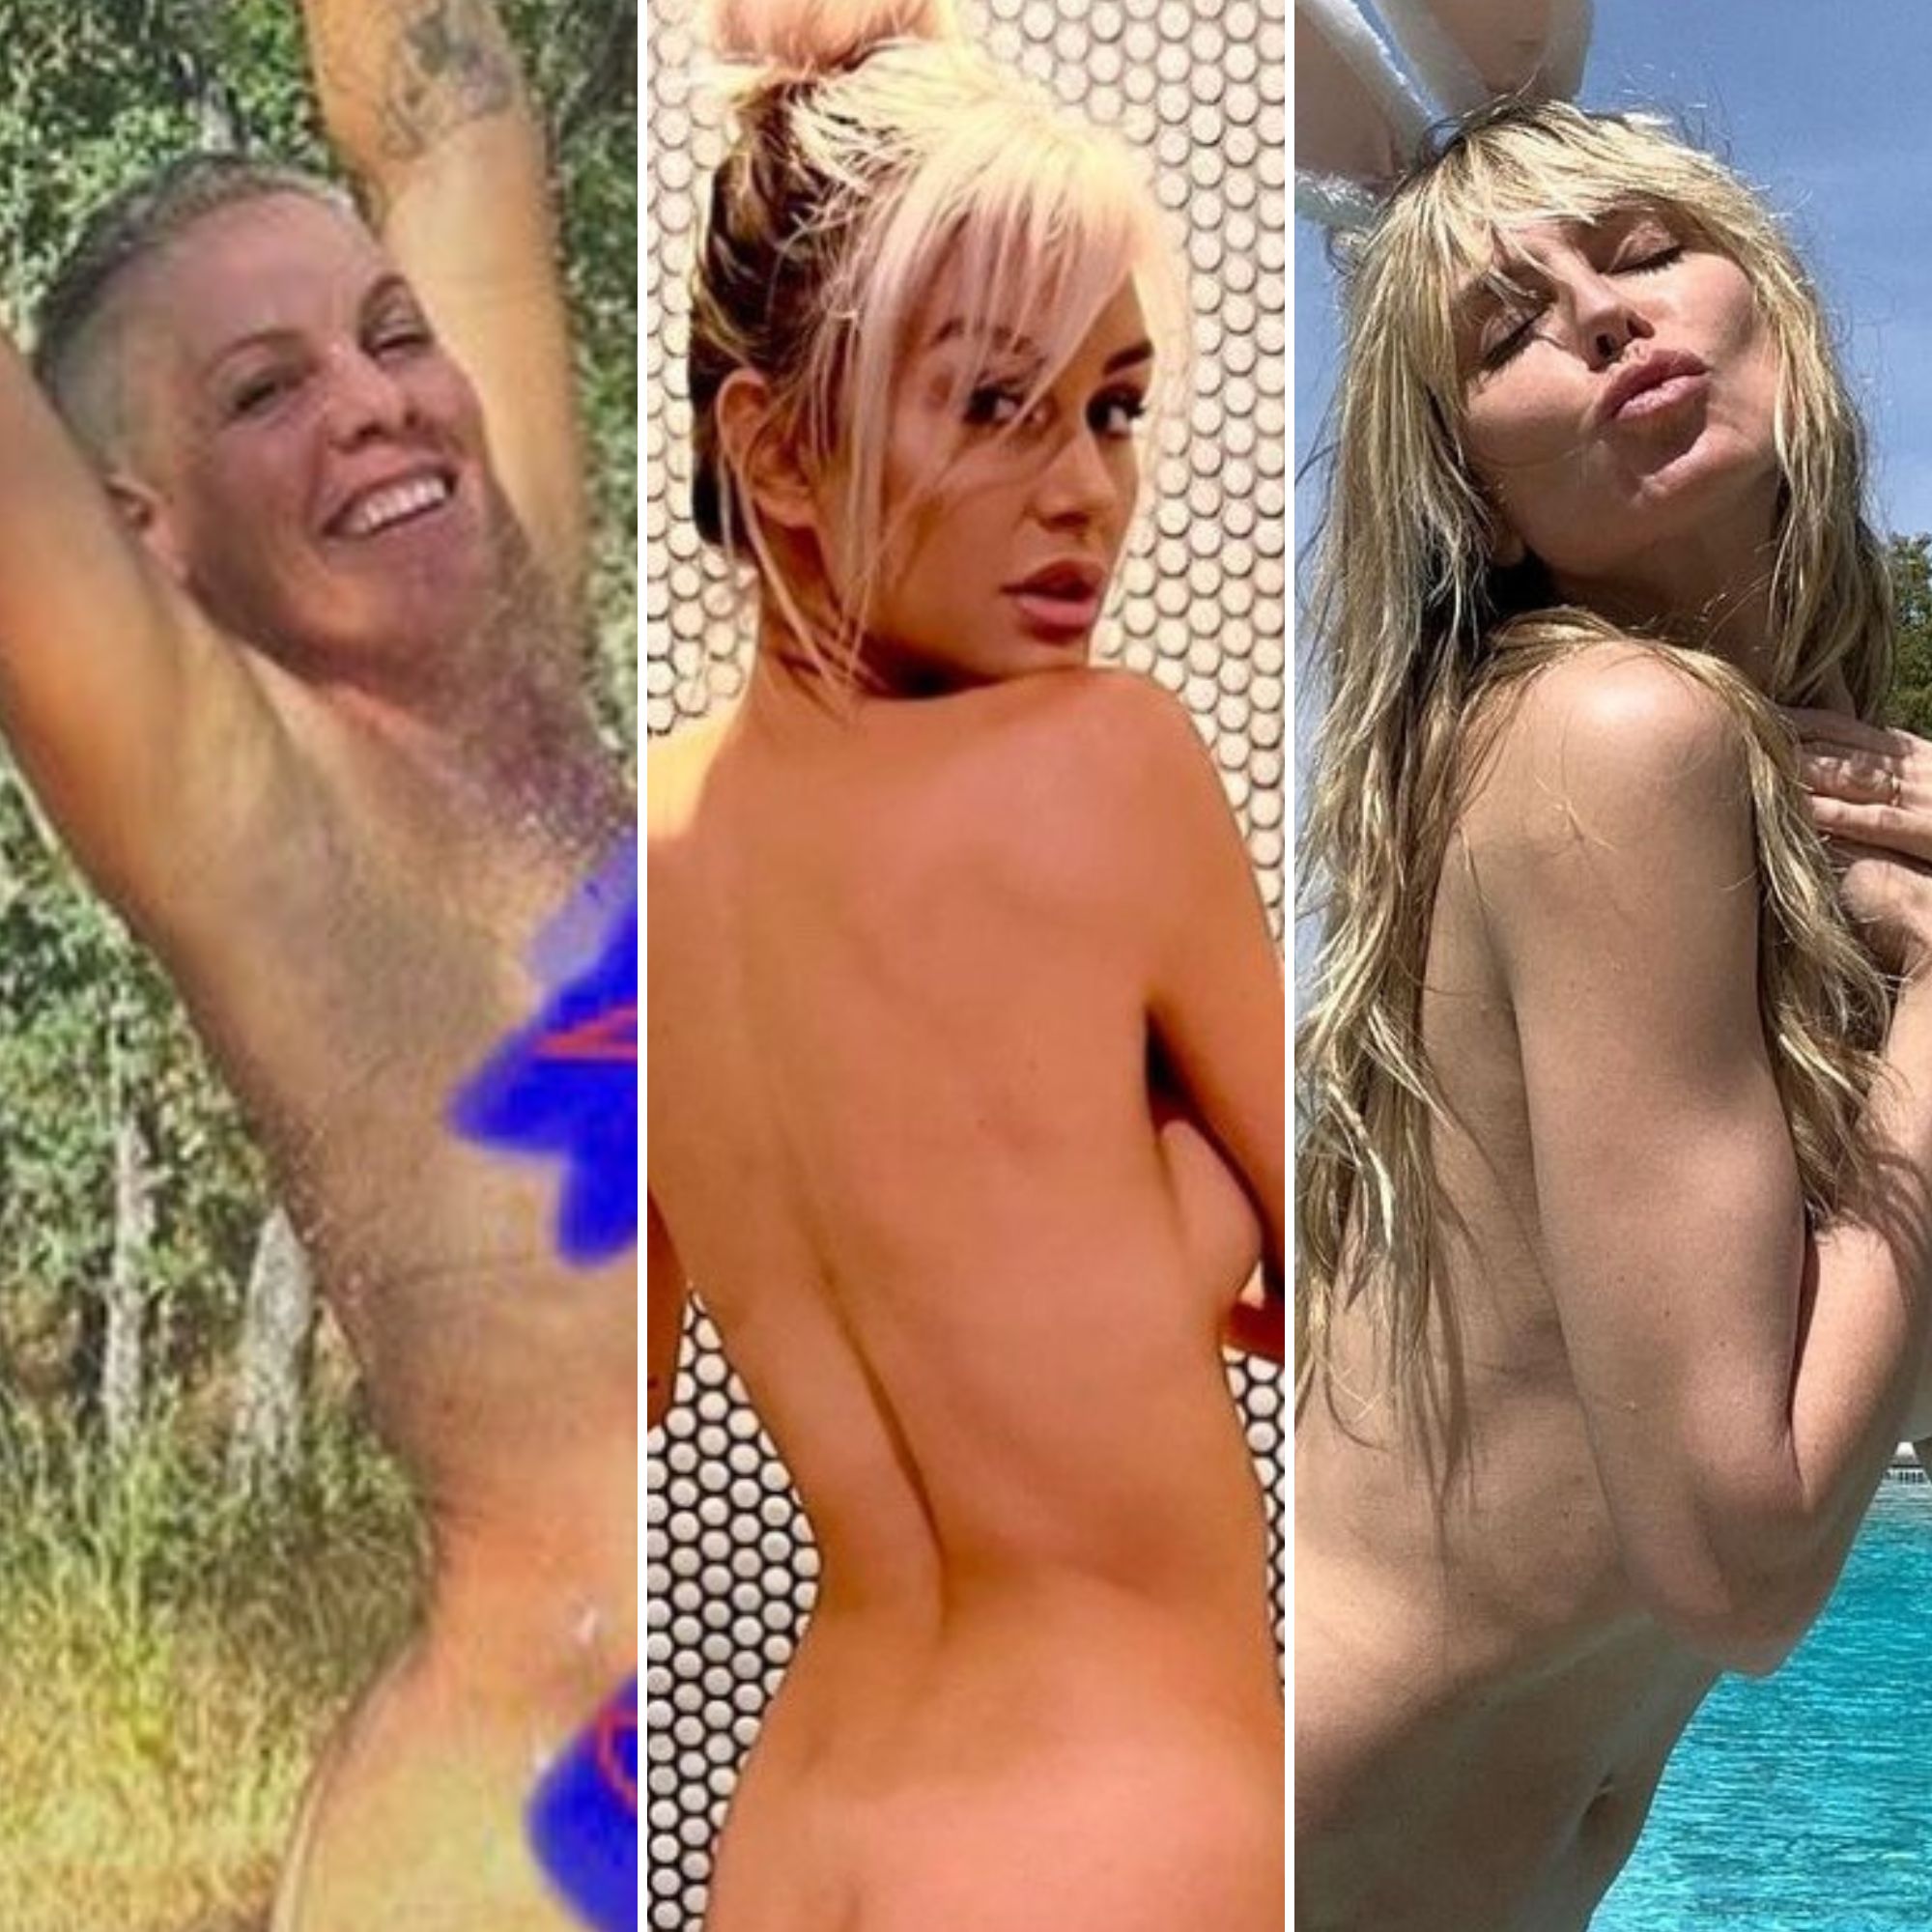 Celebrity Tits Nude - Celebrities Who Post Nude Photos: See Naked Pictures of Stars